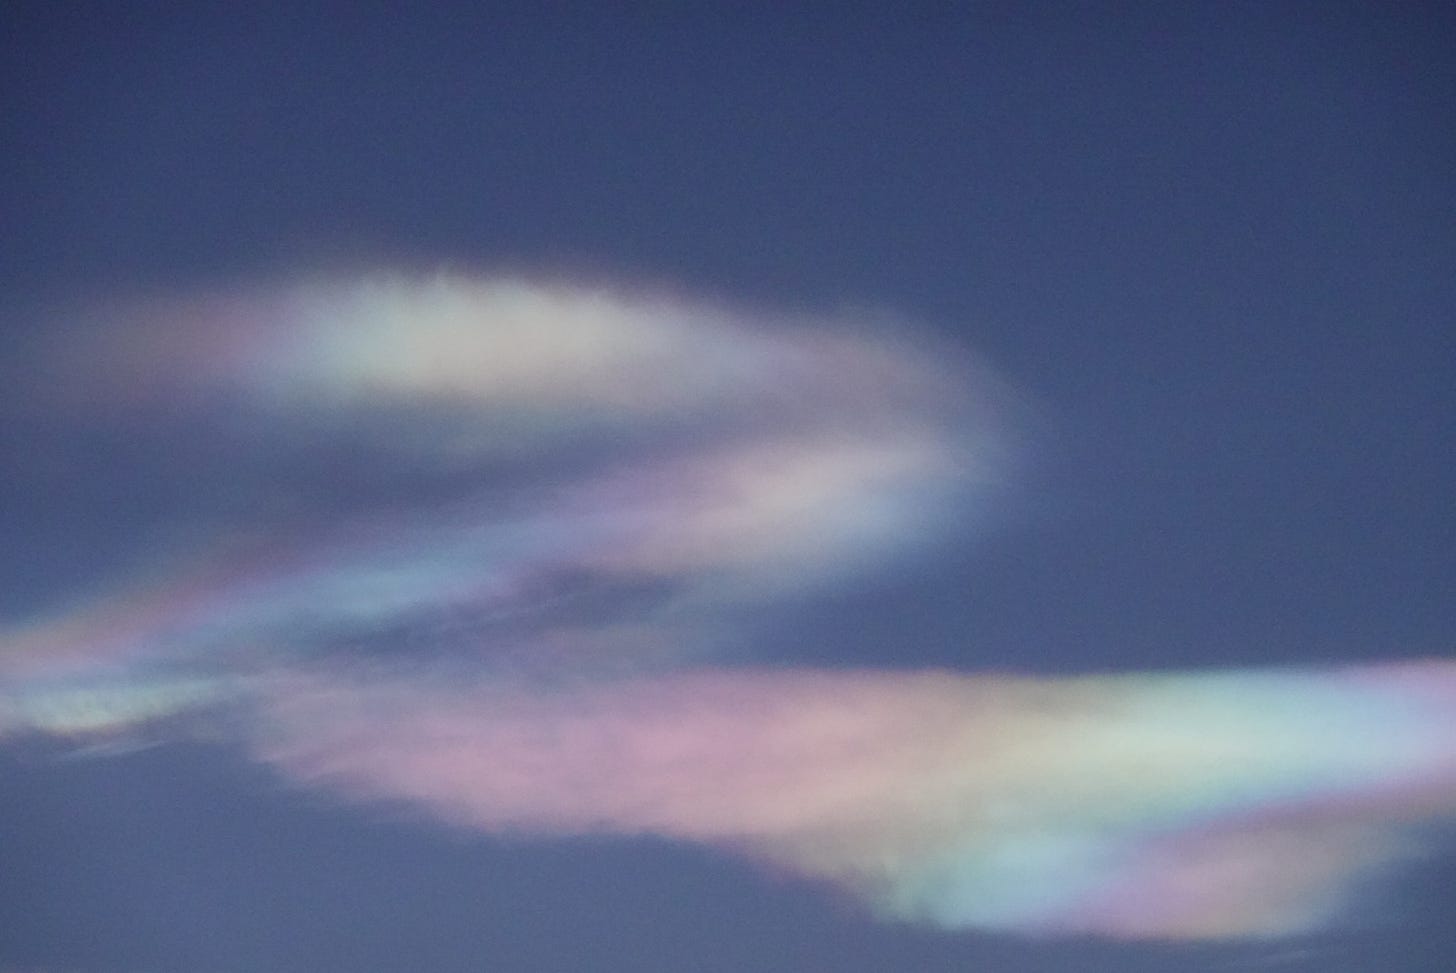 Nacreous clouds decorated the skies over North East Scotland on Christmas Eve